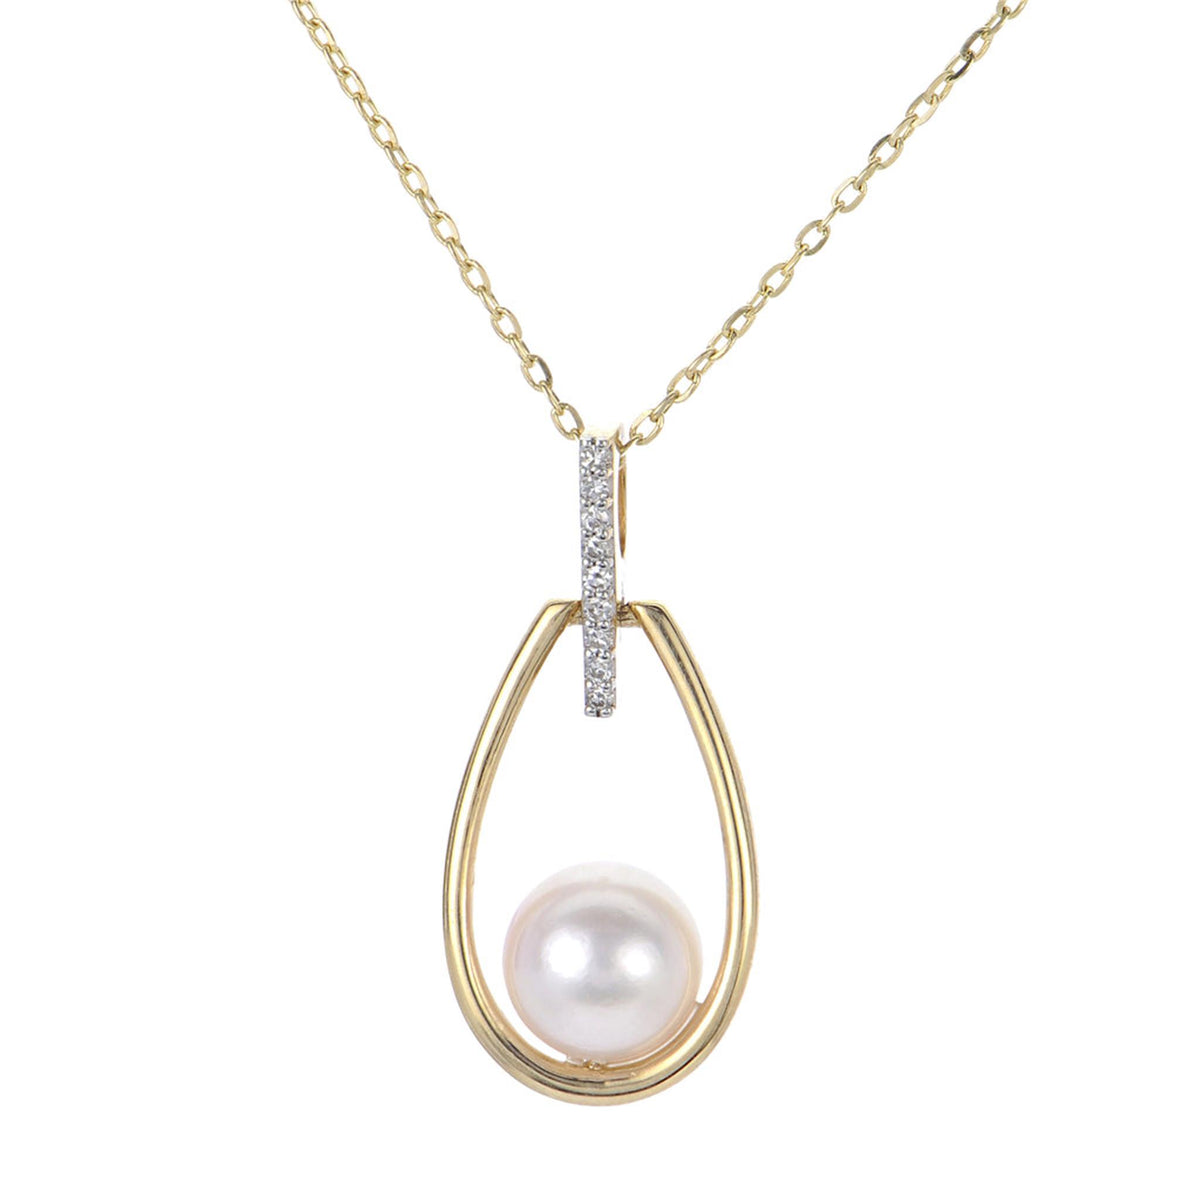 14Kt Yellow Gold Drop Pendant With 6mm Akoya Cultured Pearl